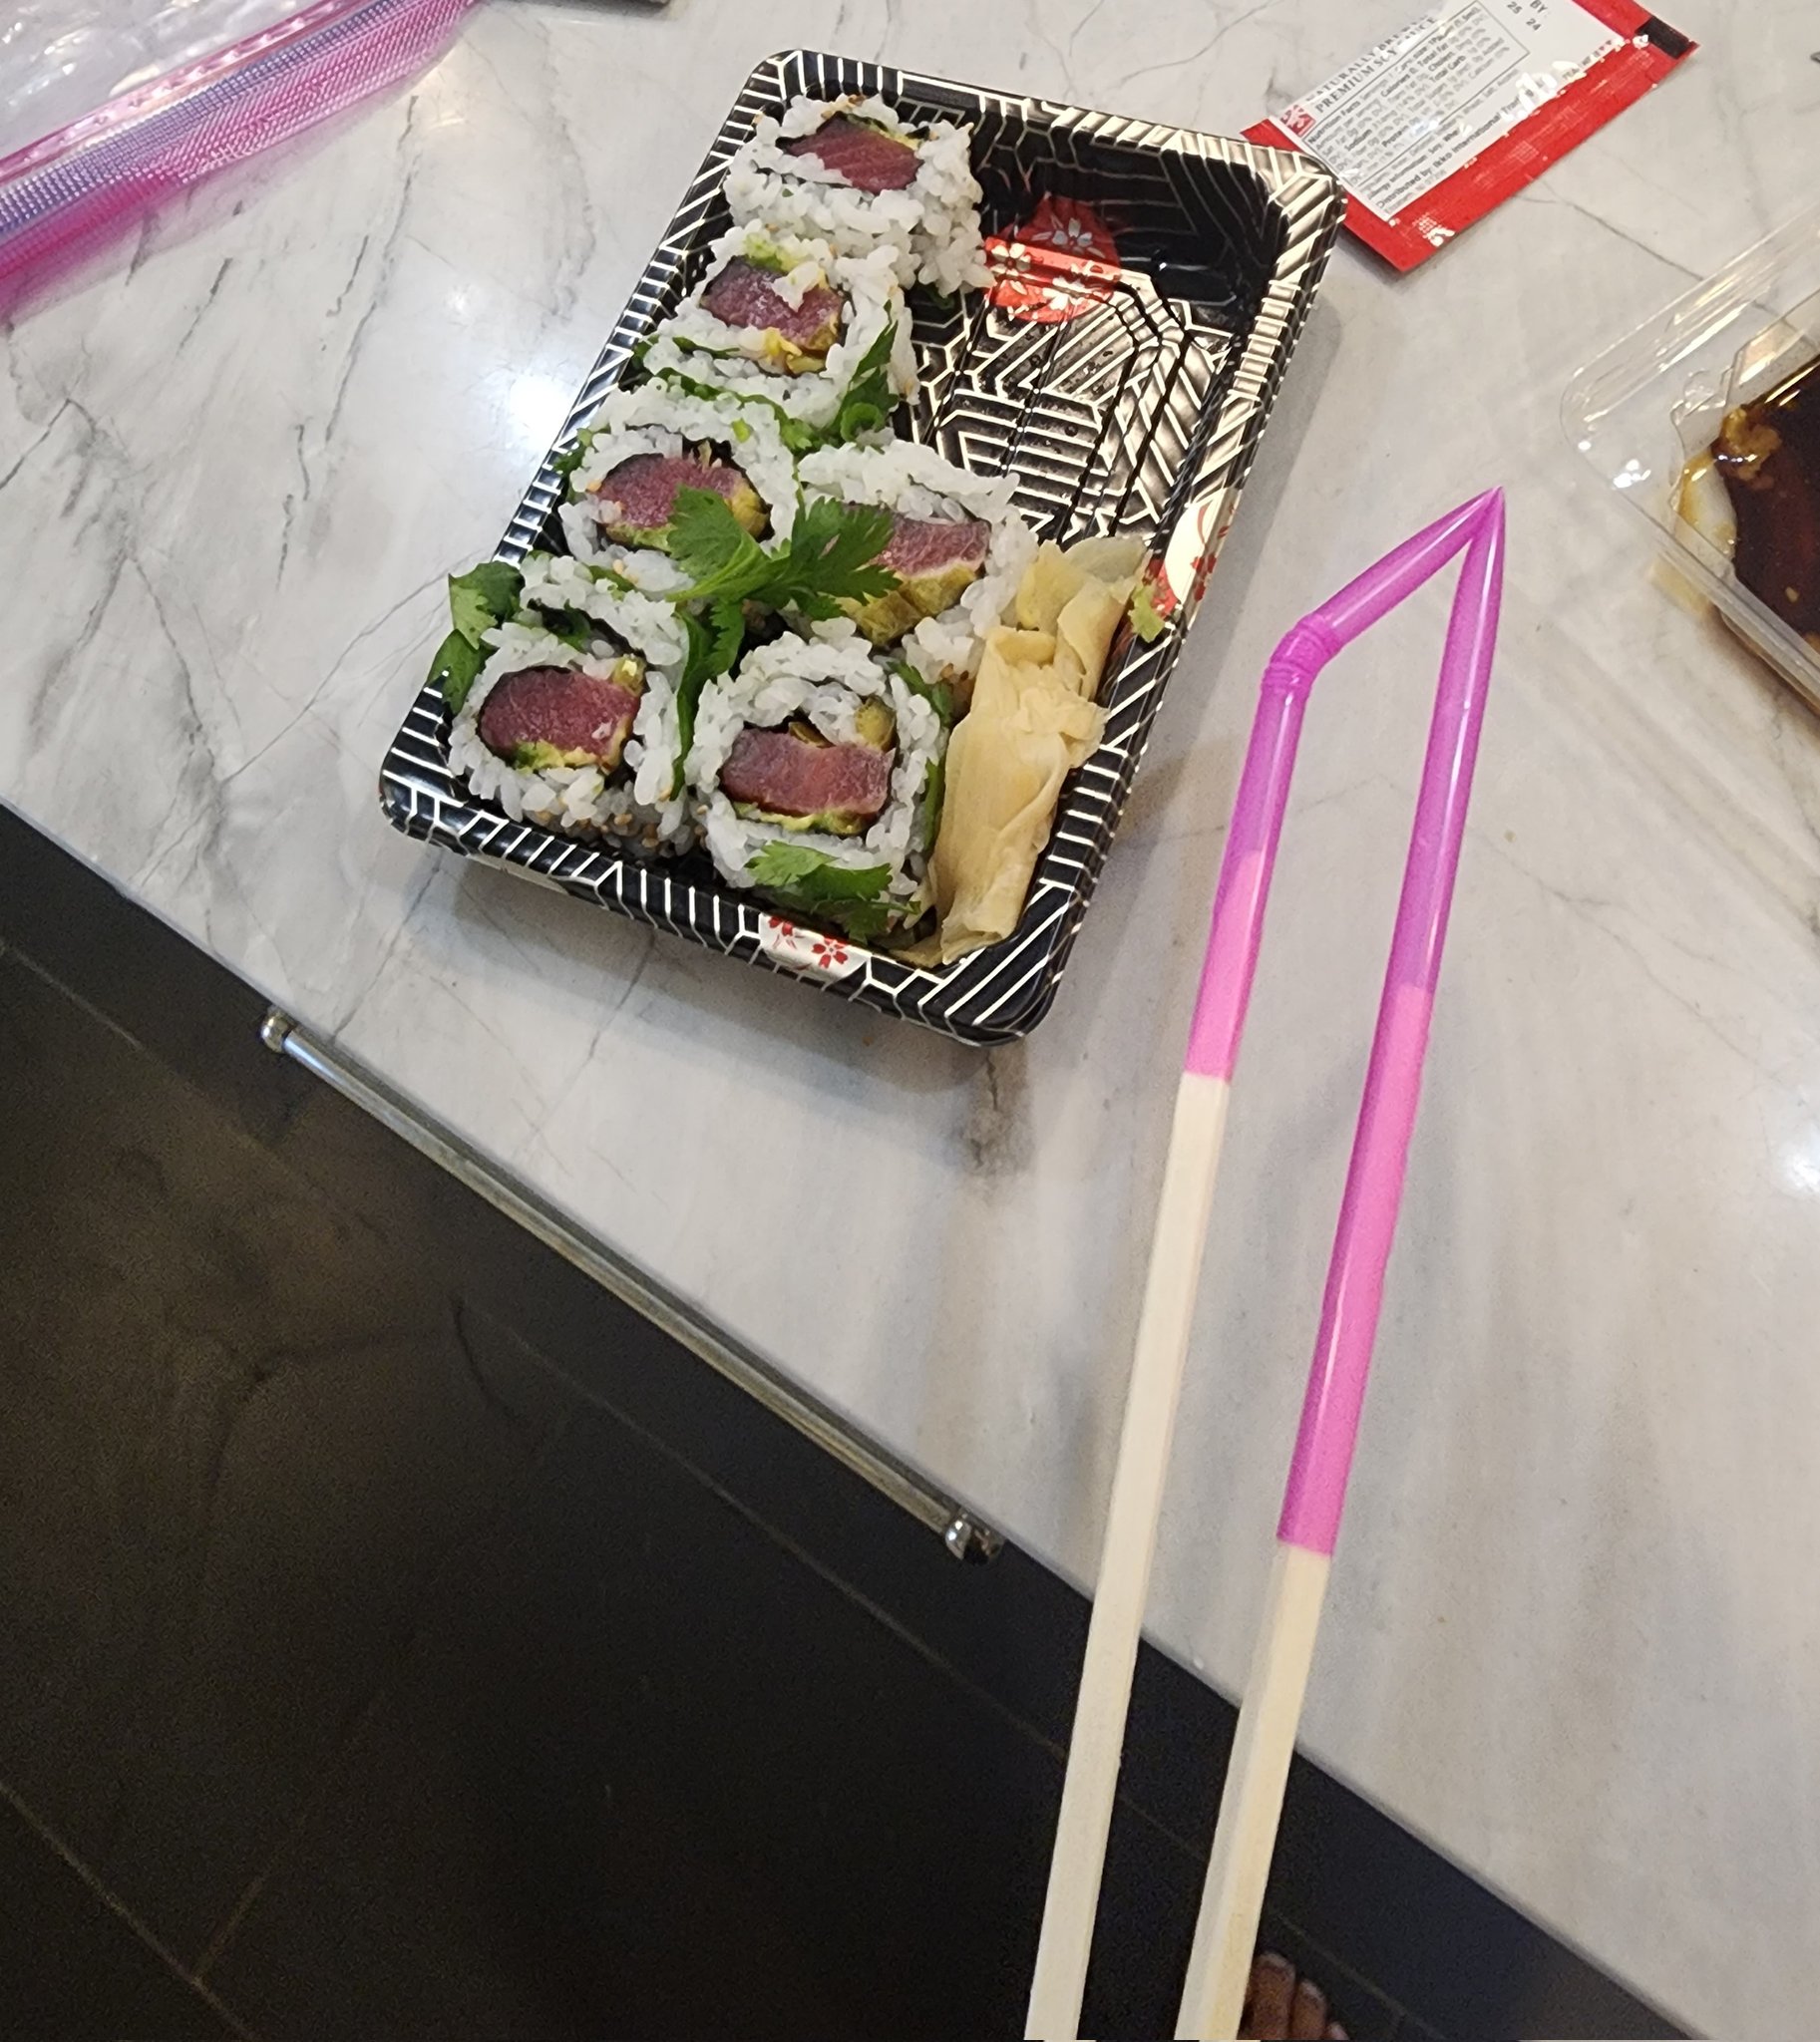 Isaac on X: Here's my dumb life hack: If you like sushi and hate  chopsticks, just connect them to a straw and voila - chopsticks for dummies   / X